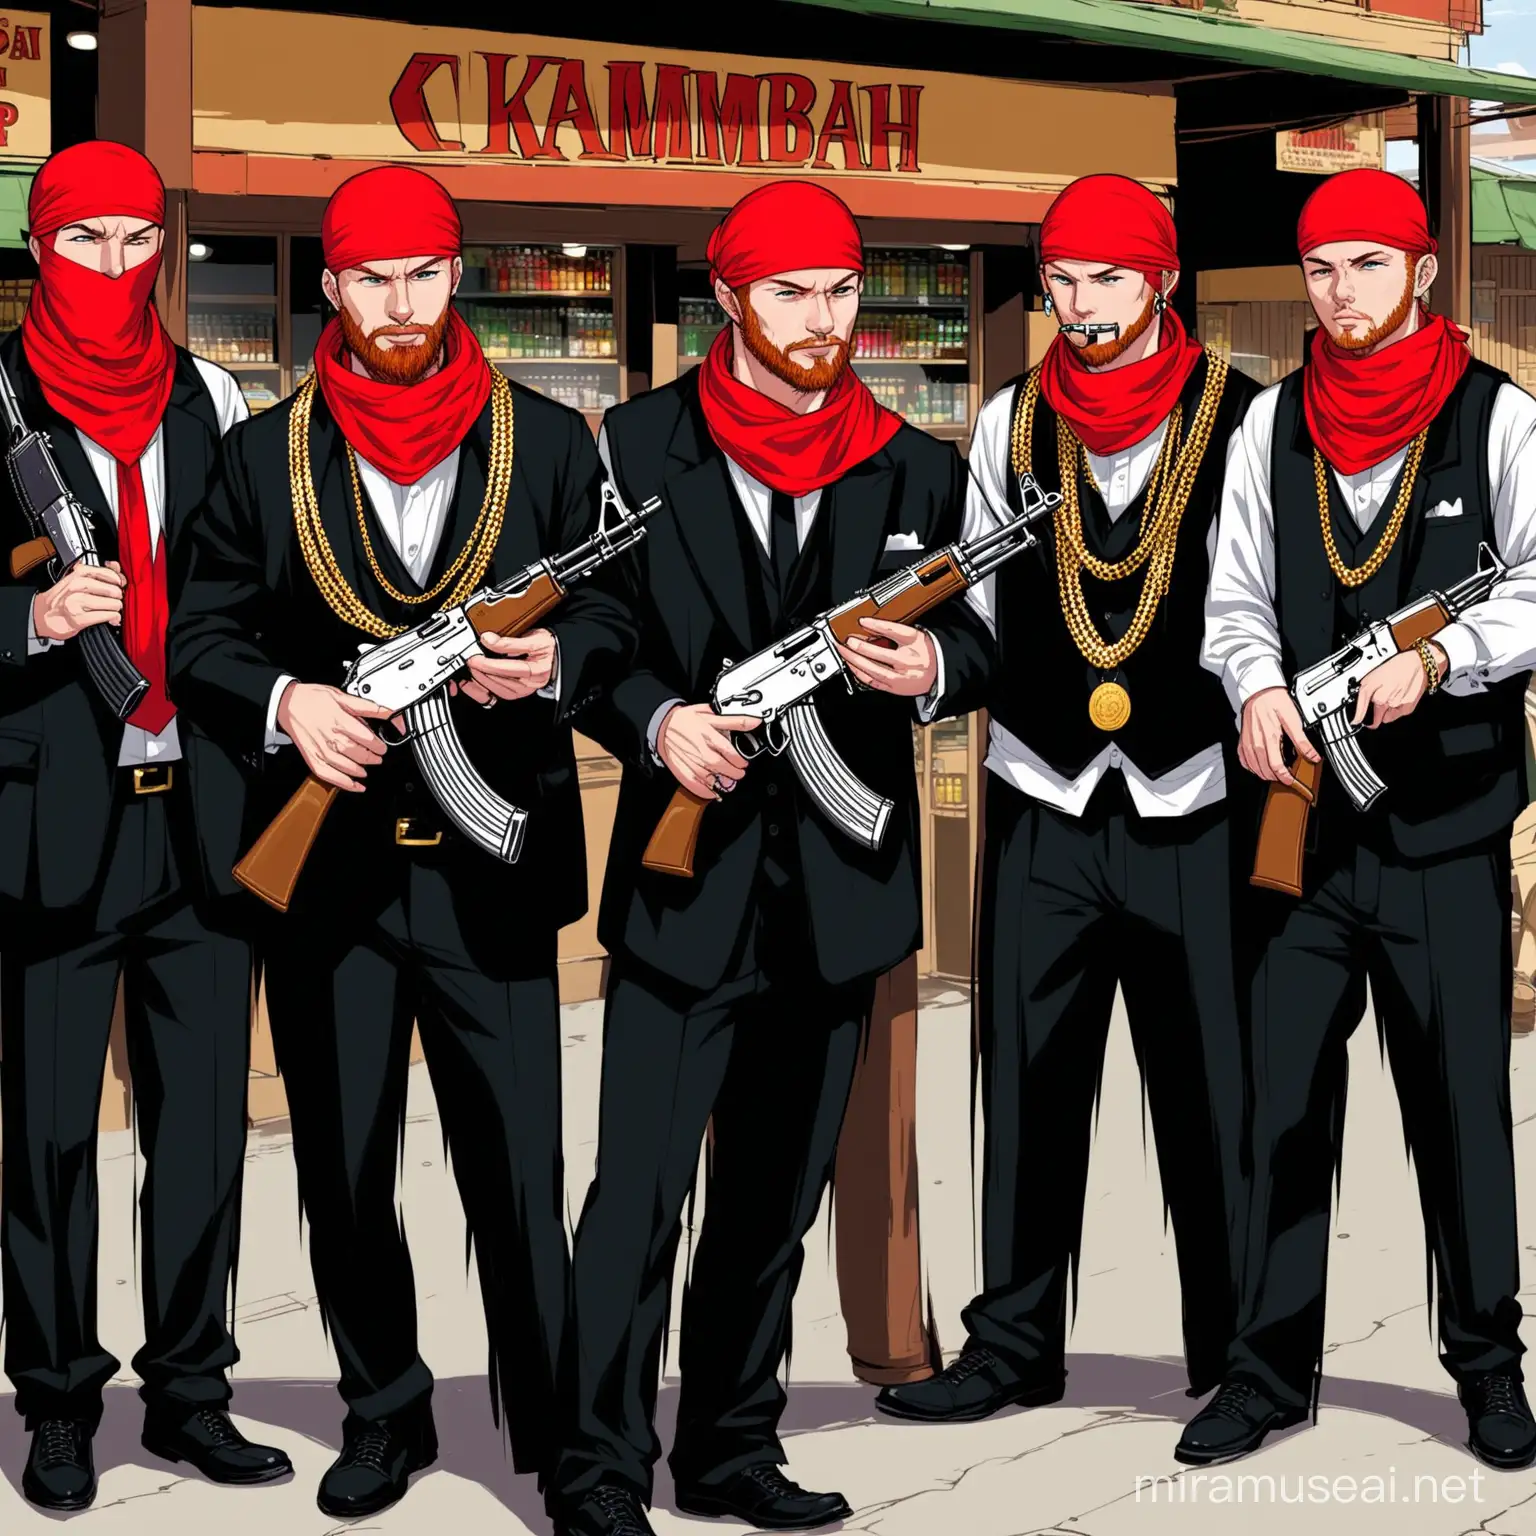 balding, red-headed irish man dressed as gangster wearing jewelled mouthpieces, gold chains, holding AK47s and wearing red bandana meeting with fellow gang members at Kambah shops.